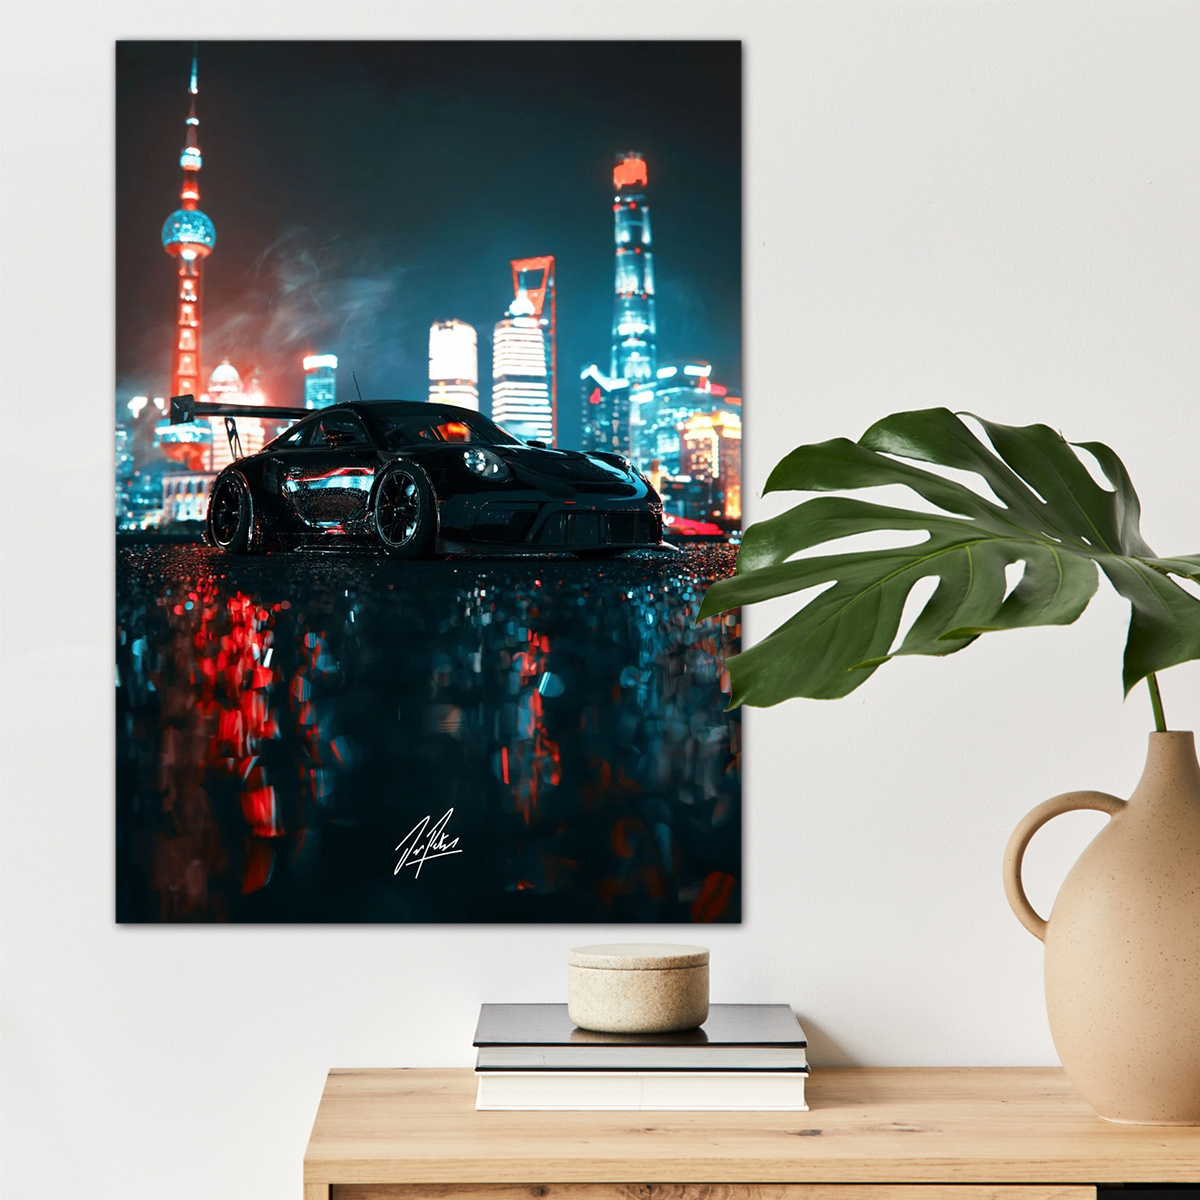 

1pc Car On The Road Canvas Wall Art For Home Decor, High Quality And Fans Wall Decor, Car Lovers Canvas Prints For Living Room Bedroom Bathroom Kitchen Office Cafe Decor, Perfect Gift And Decoration